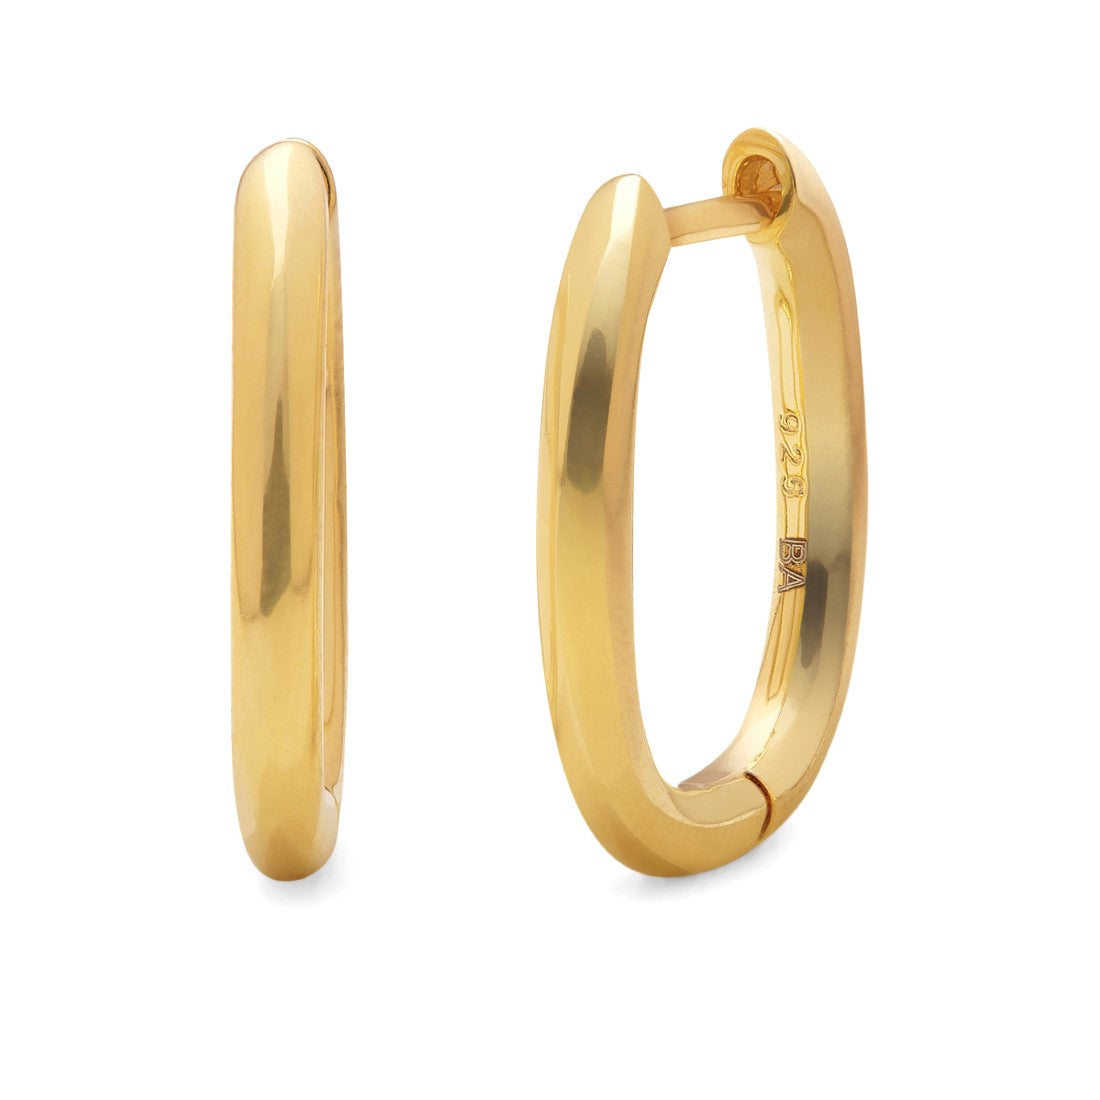 Radiant Hoops 925 Sterling Silver Gold-Plated Earrings